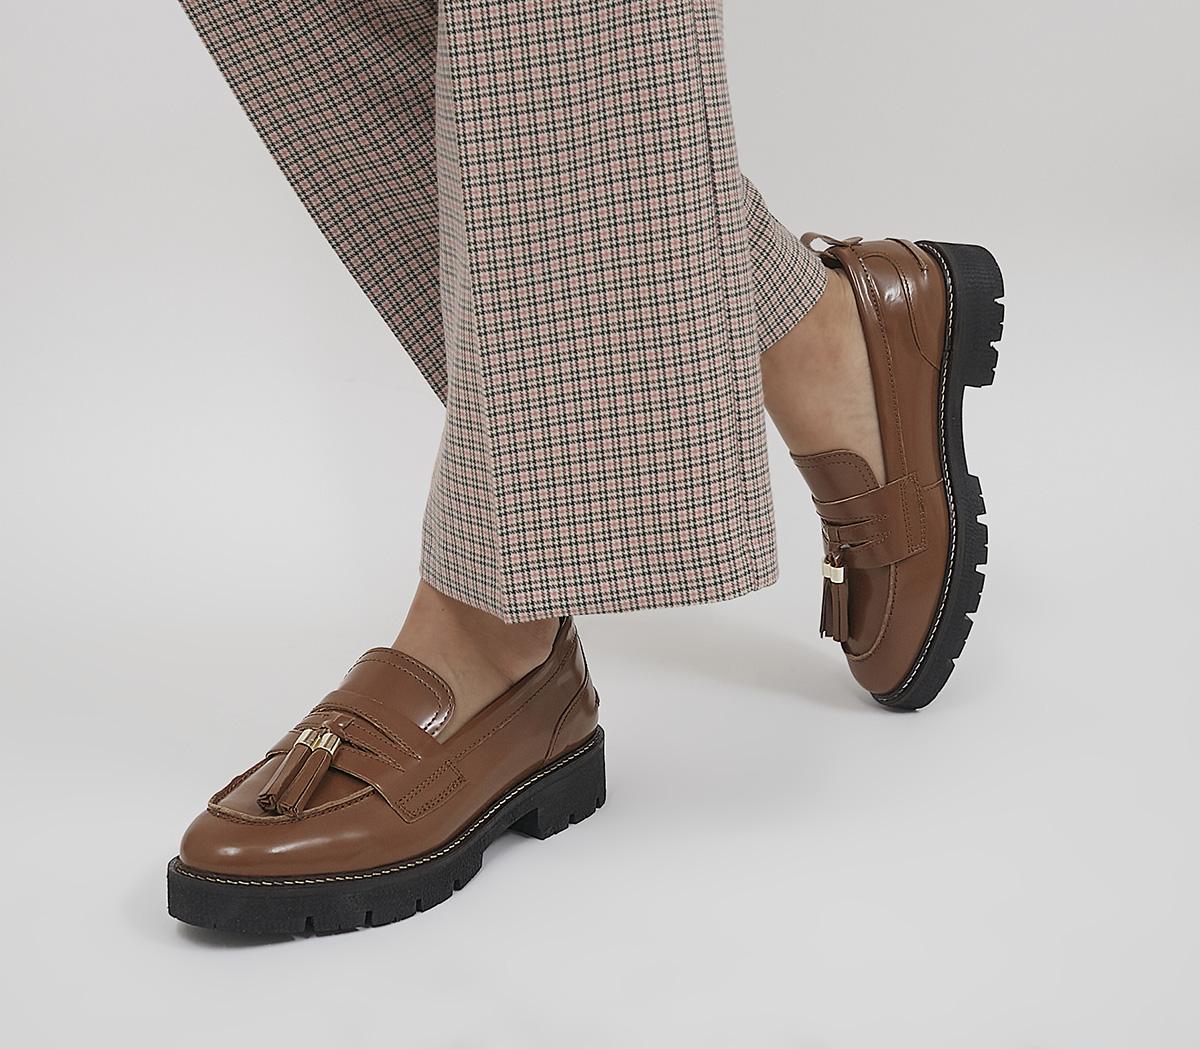 OfficeFundamental Cleated Tassel Loafer ShoesBrown Leather